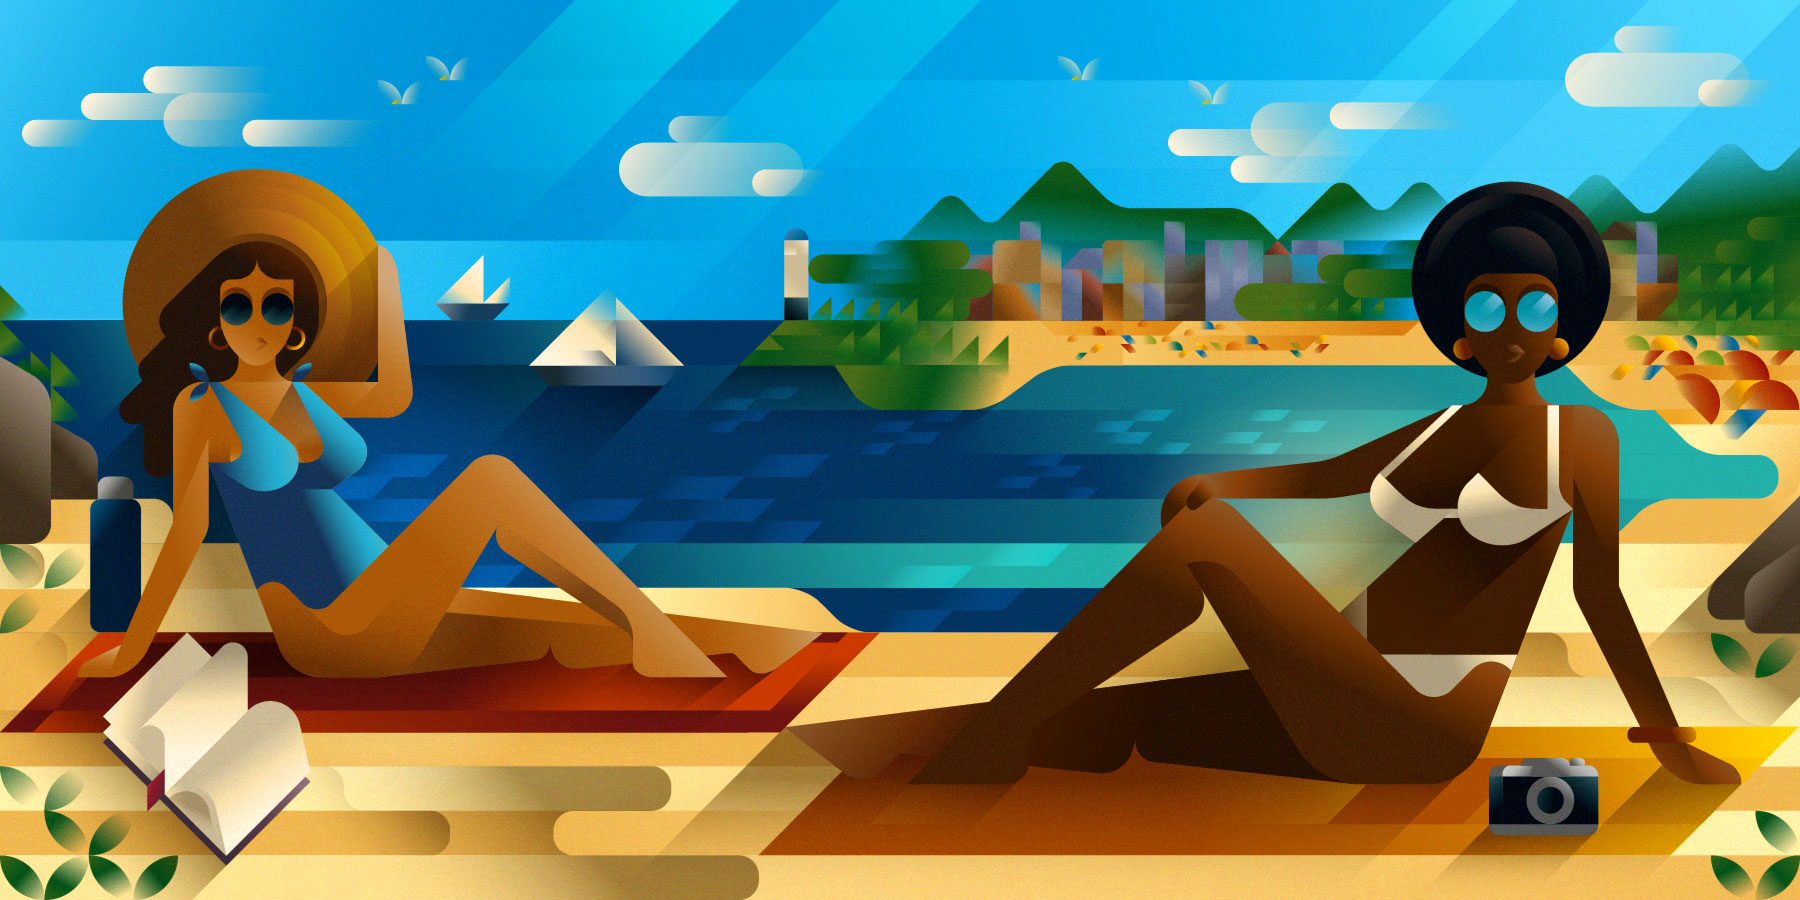 Beautiful young women in bikini relaxing at the beach, landscape editorial illustration by Francesco Faggiano illustrator